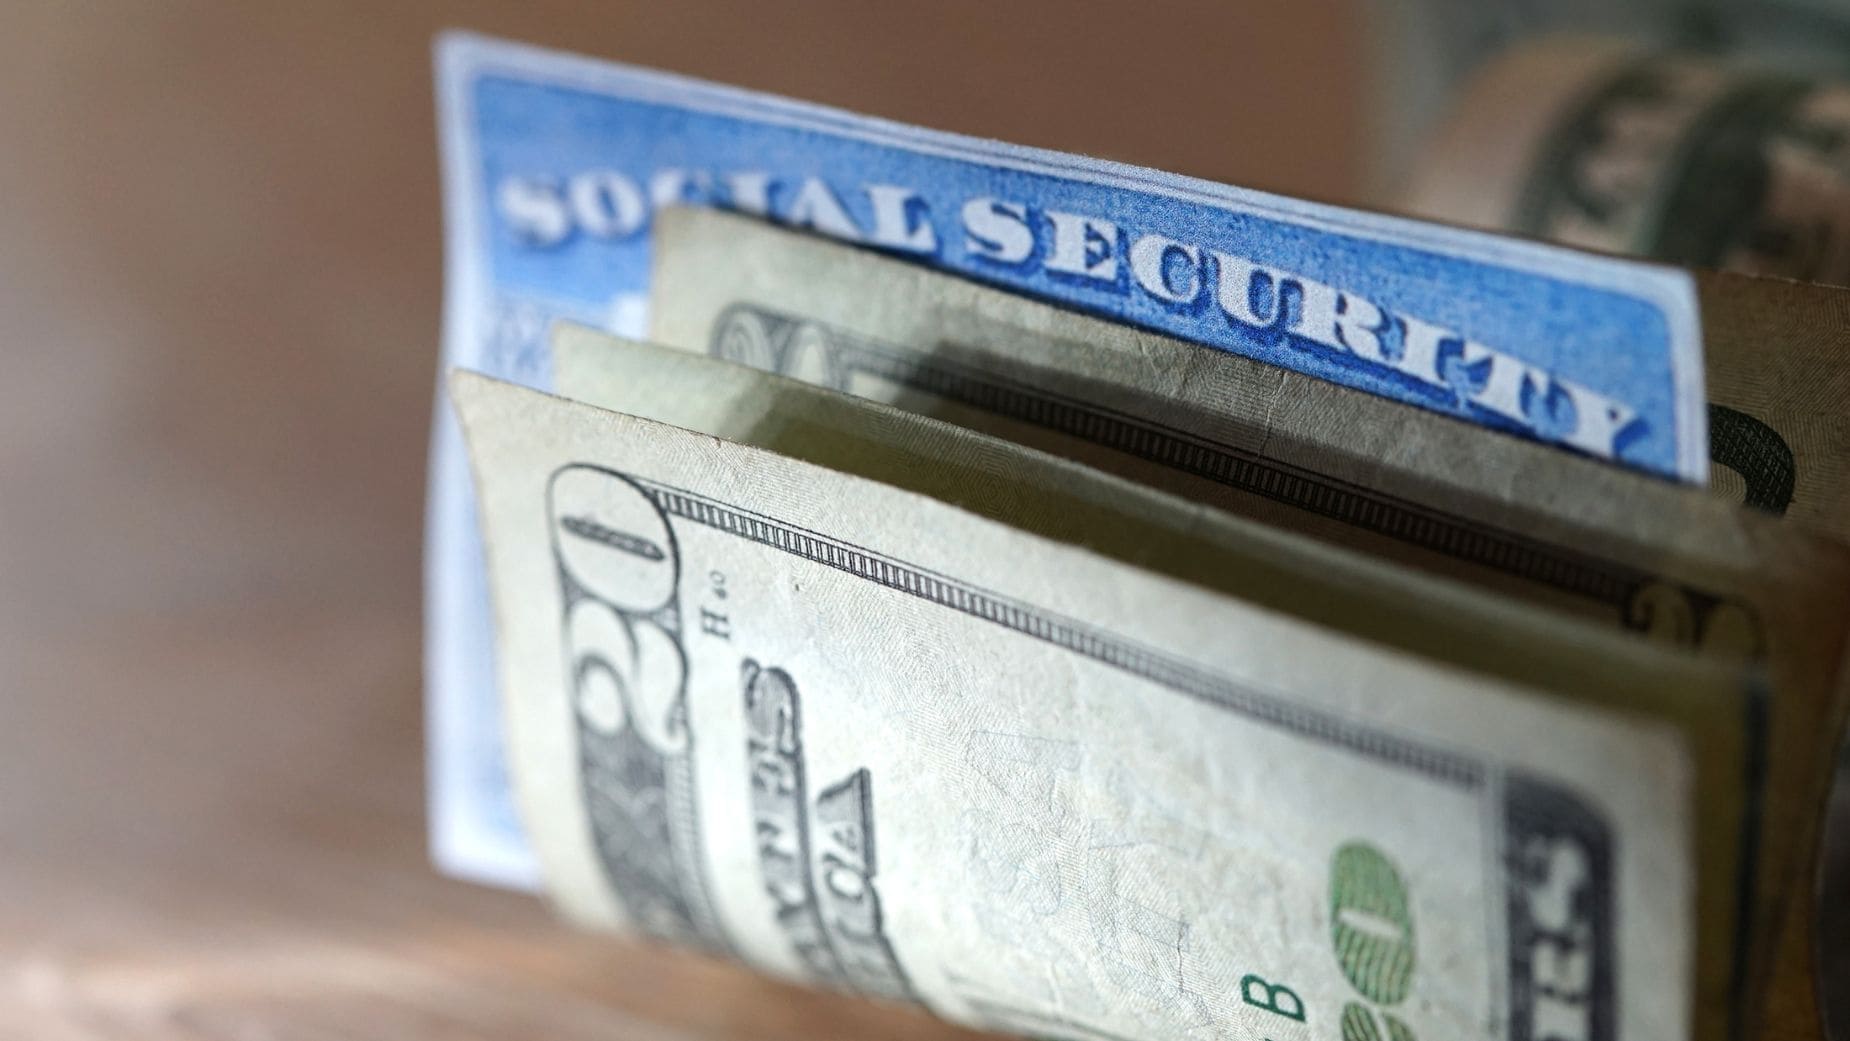 You can get the new Social Security check in February 14th